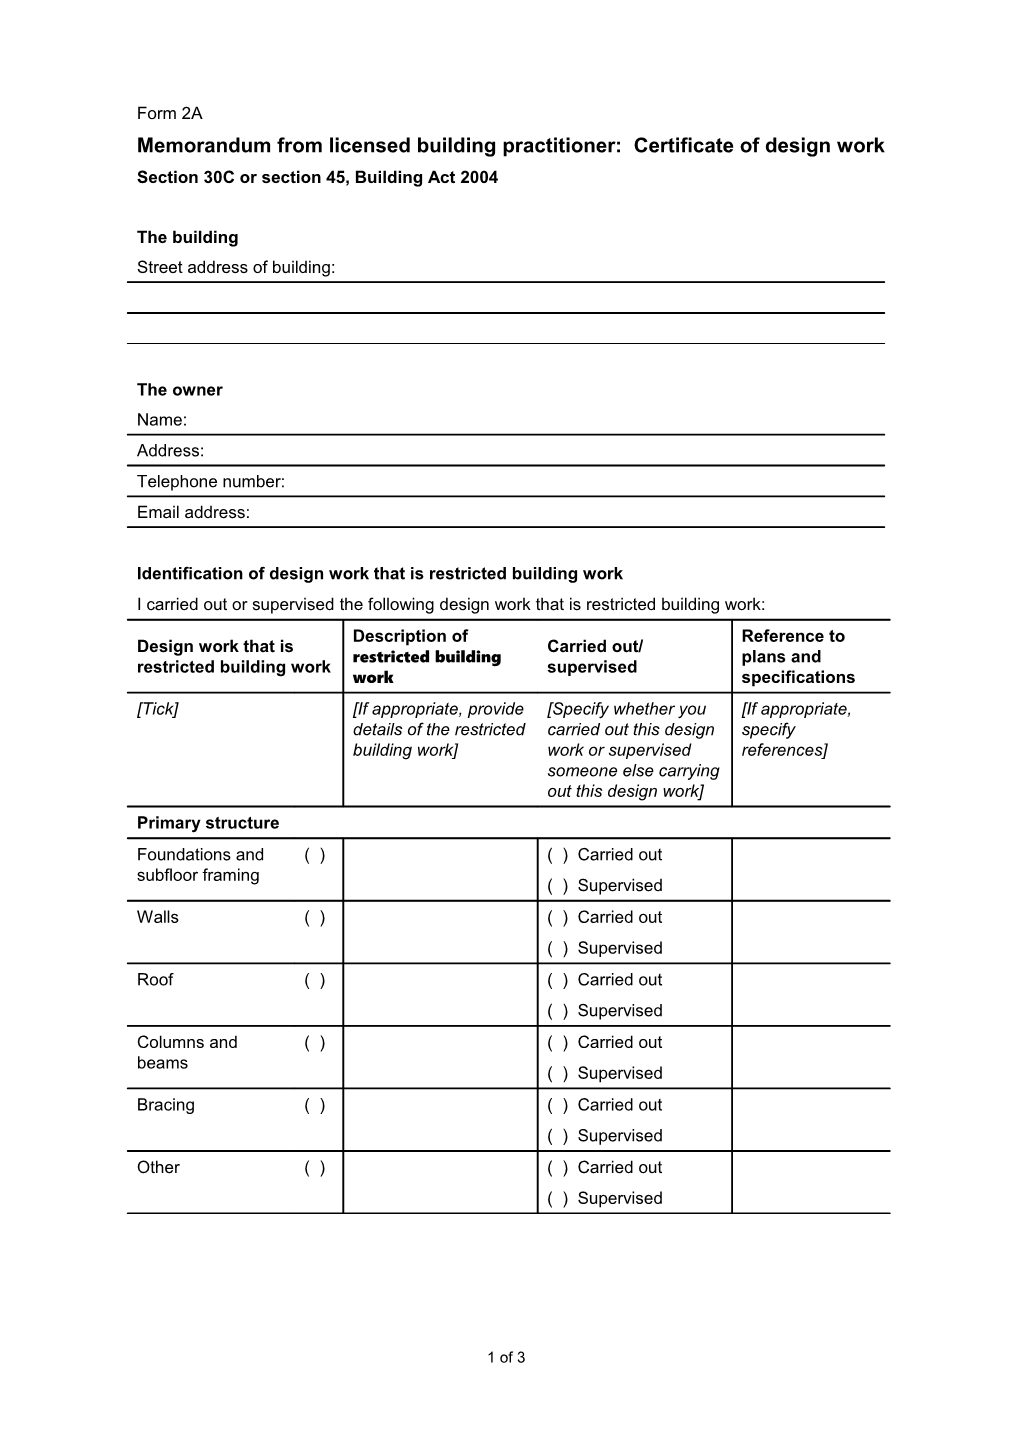 Form 6 - Application for Code Compliance Certificate